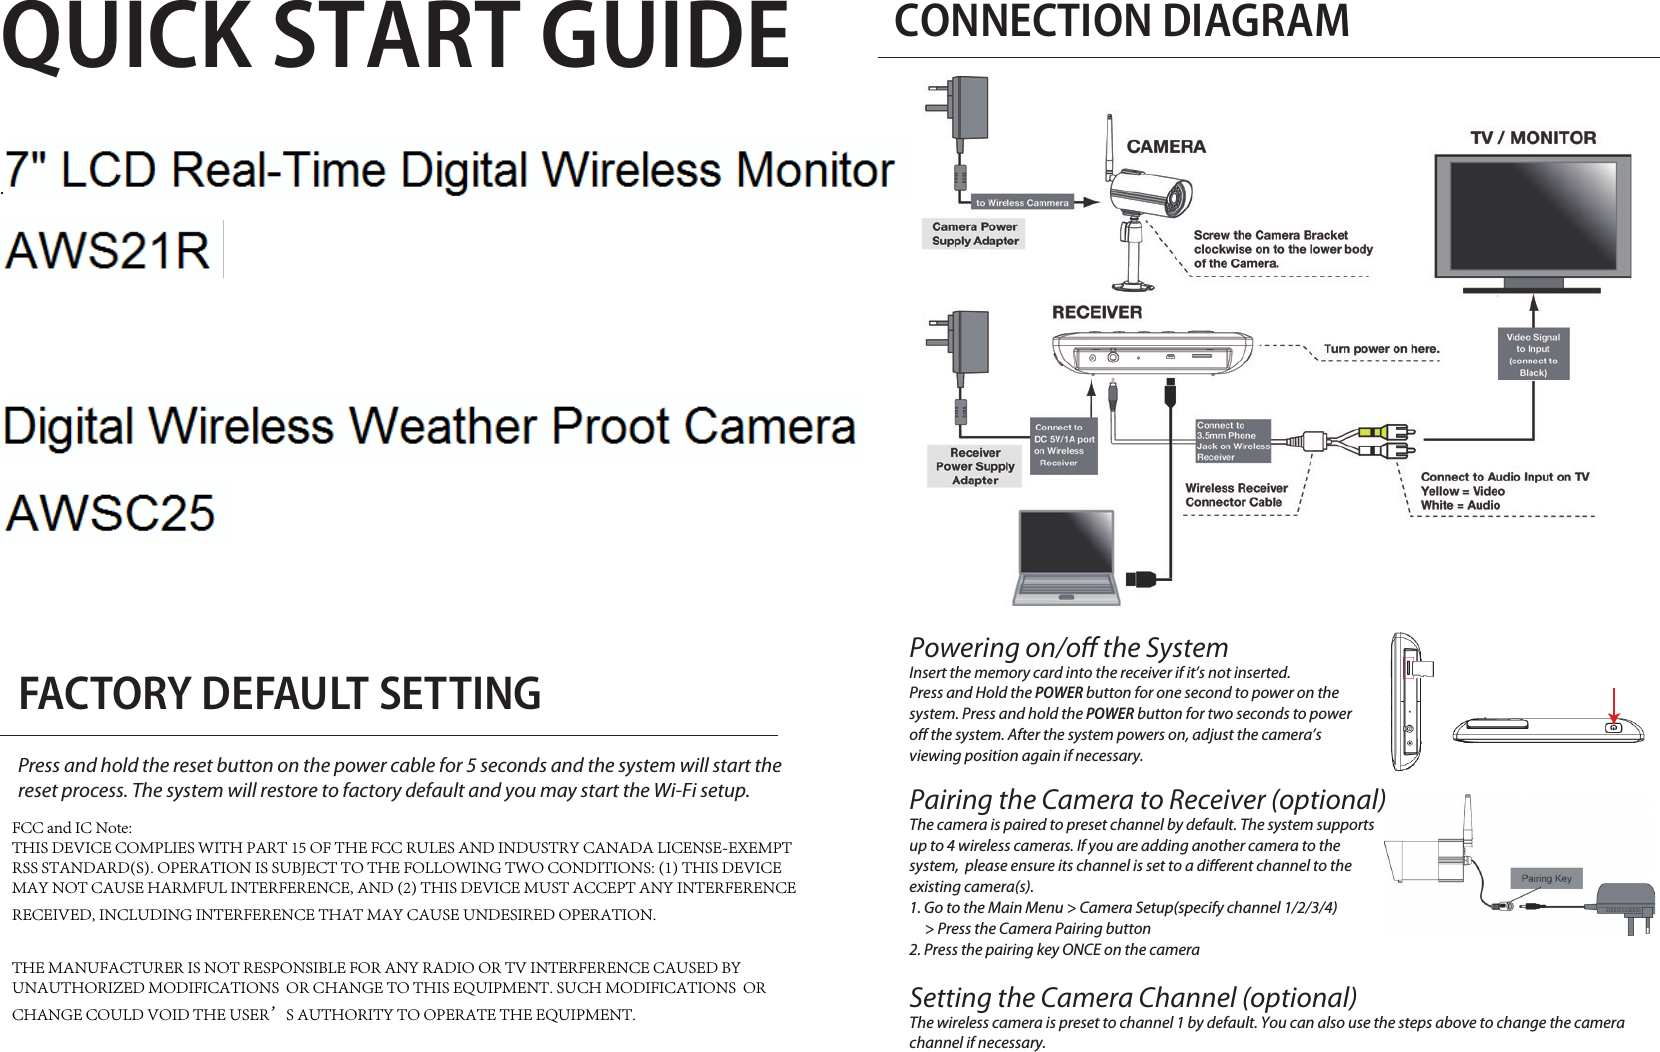 QUICK START GUIDEKIT CONTENT Digital Wireless Camera Digital Wireless Receiverx 2 x 1Camera Antennax 2 x2Camera Standx 3Power AdapterPress and hold the reset button on the power cable for 5 seconds and the system will start the reset process. The system will restore to factory default and you may start the Wi-Fi setup.FACTORY DEFAULT SETTINGCONNECTION DIAGRAMUSB Cabelx 1Screw Pack x 1AV Cablex 1Powering on/o the SystemInsert the memory card into the receiver if it’s not inserted. Press and Hold the POWER button for one second to power on the system. Press and hold the POWER button for two seconds to power o the system. After the system powers on, adjust the camera’s viewing position again if necessary.Pairing the Camera to Receiver (optional)The camera is paired to preset channel by default. The system supports up to 4 wireless cameras. If you are adding another camera to the system,  please ensure its channel is set to a dierent channel to the existing camera(s).1. Go to the Main Menu &gt; Camera Setup(specify channel 1/2/3/4)      &gt; Press the Camera Pairing button2. Press the pairing key ONCE on the cameraSetting the Camera Channel (optional)The wireless camera is preset to channel 1 by default. You can also use the steps above to change the camera channel if necessary.Quick Start Guidex 1FCC and IC Note:THIS DEVICE COMPLIES WITH PART 15 OF THE FCC RULES AND INDUSTRY CANADA LICENSE-EXEMPT RSS STANDARD(S). OPERATION IS SUBJECT TO THE FOLLOWING TWO CONDITIONS: (1) THIS DEVICE MAY NOT CAUSE HARMFUL INTERFERENCE, AND (2) THIS DEVICE MUST ACCEPT ANY INTERFERENCE RECEIVED, INCLUDING INTERFERENCE THAT MAY CAUSE UNDESIRED OPERATION.THE MANUFACTURER IS NOT RESPONSIBLE FOR ANY RADIO OR TV INTERFERENCE CAUSED BY UNAUTHORIZED MODIFICATIONS  OR CHANGE TO THIS EQUIPMENT. SUCH MODIFICATIONS  OR CHANGE COULD VOID THE USER’S AUTHORITY TO OPERATE THE EQUIPMENT.